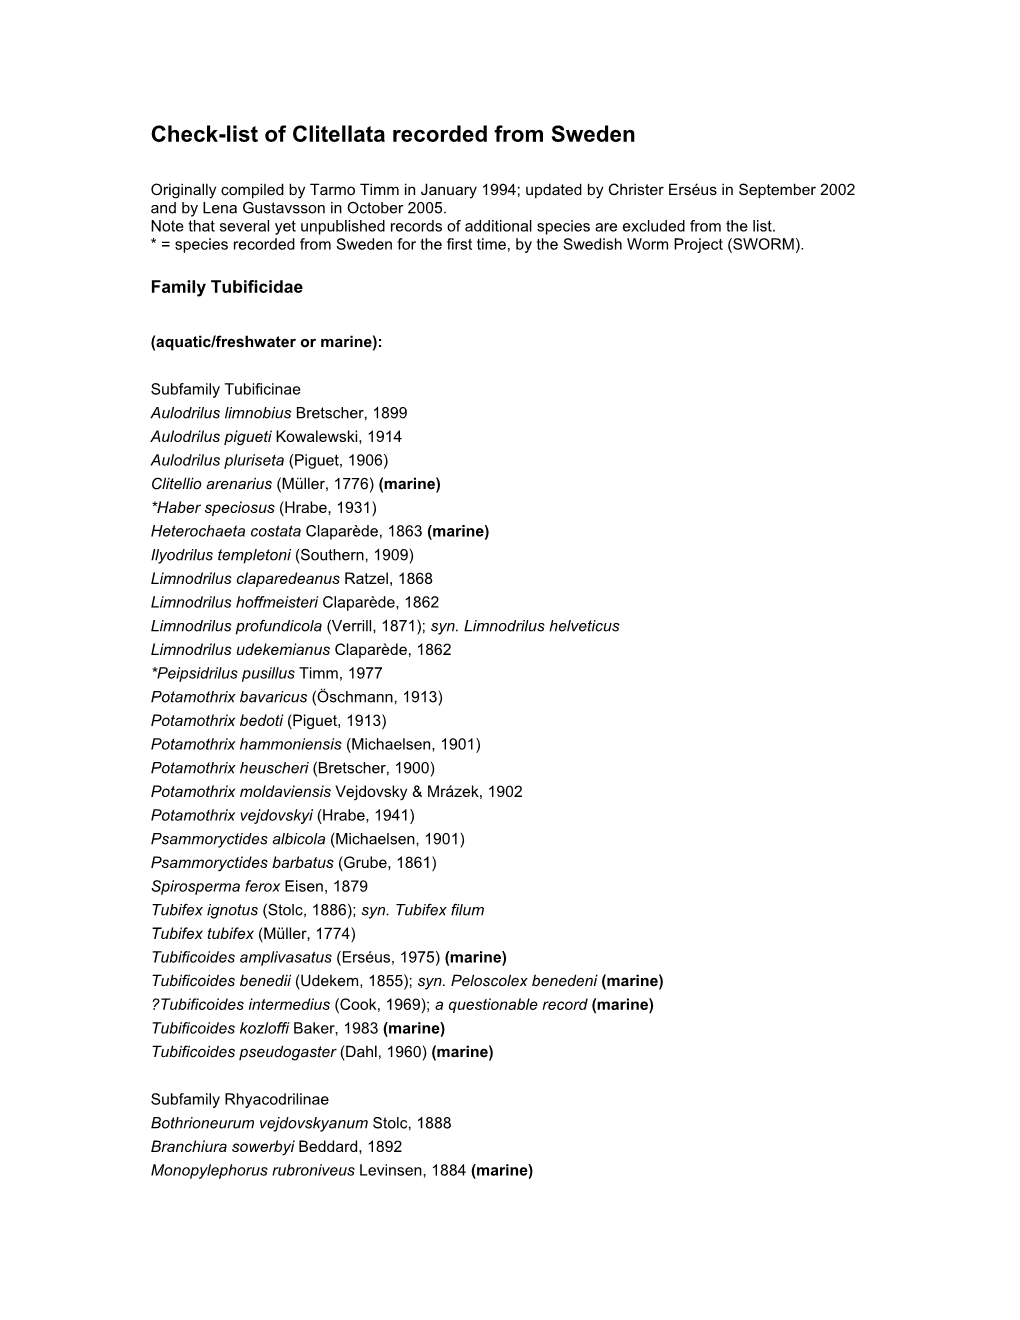 Check-List of Clitellata Recorded from Sweden